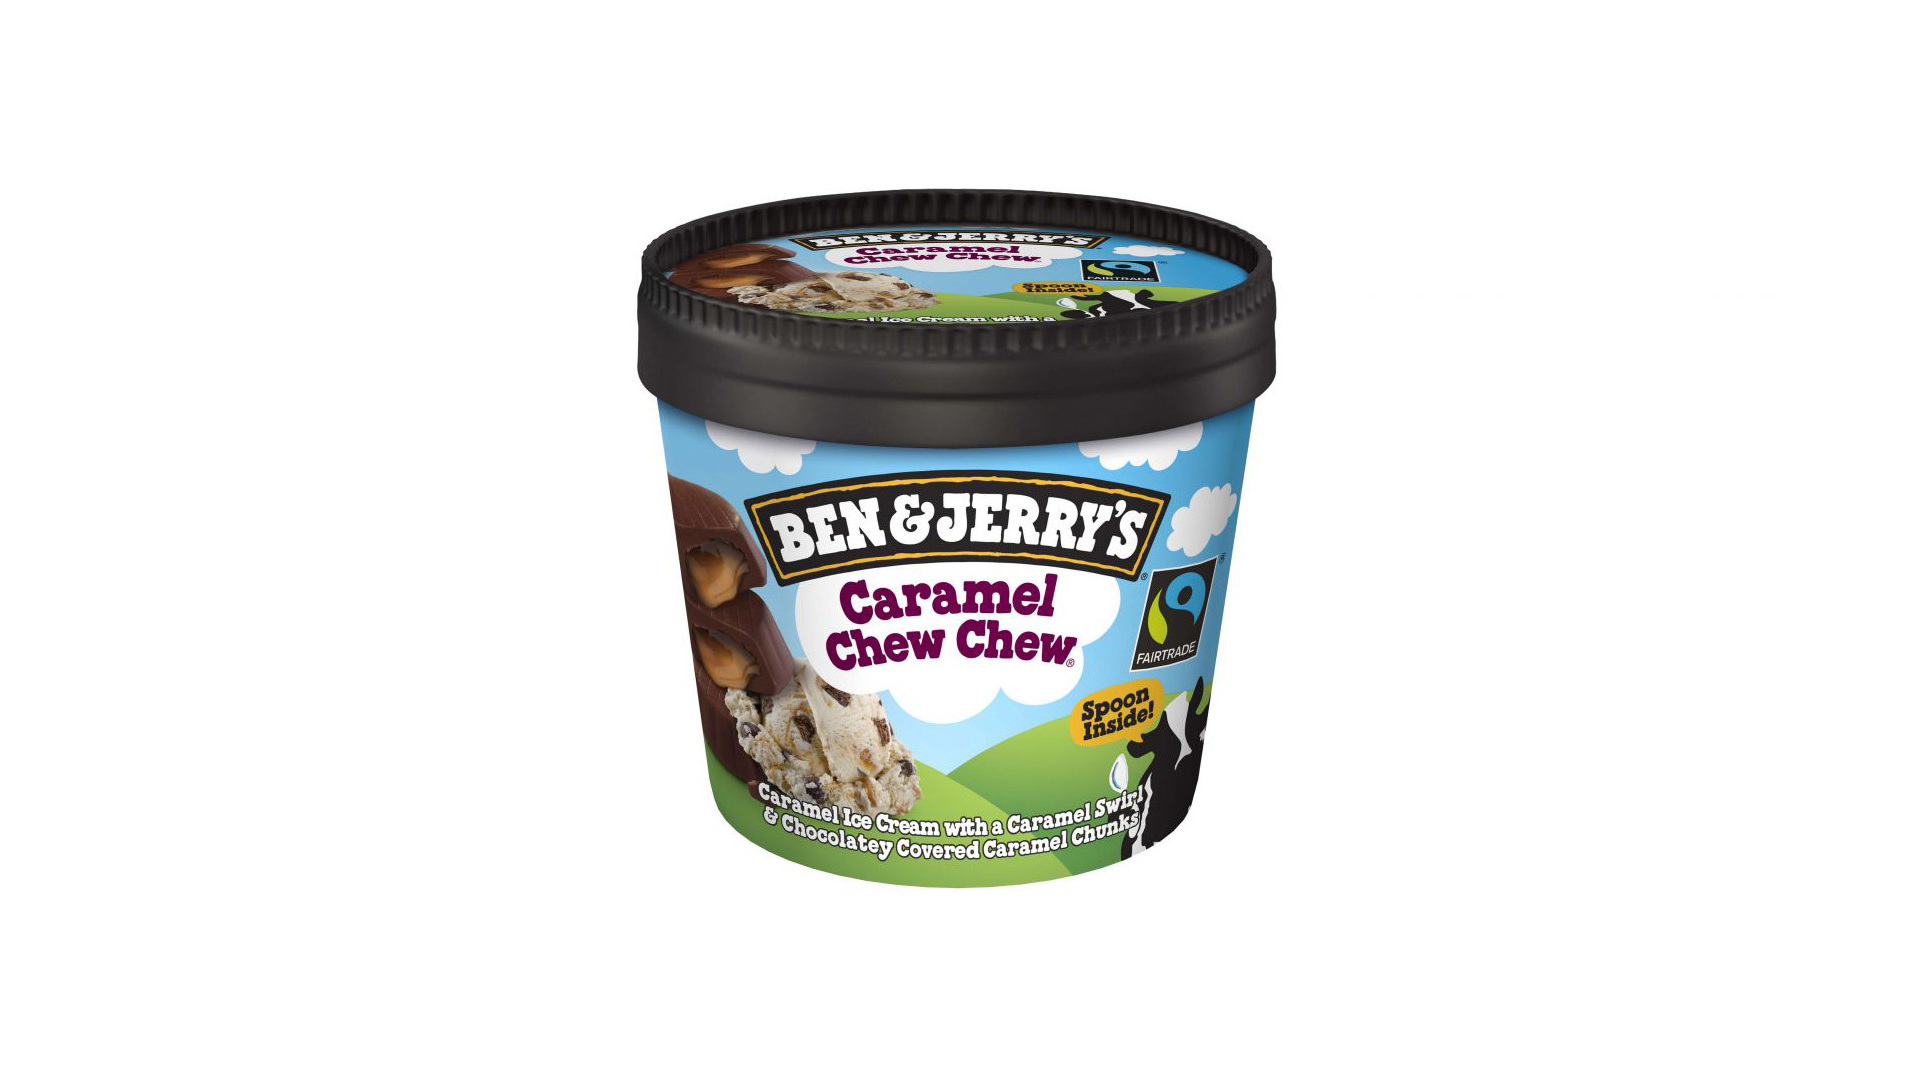 Ben & Jerry's Caramel Chew Chew 100ml - Pizza Collection in Walthamstow Forest E17